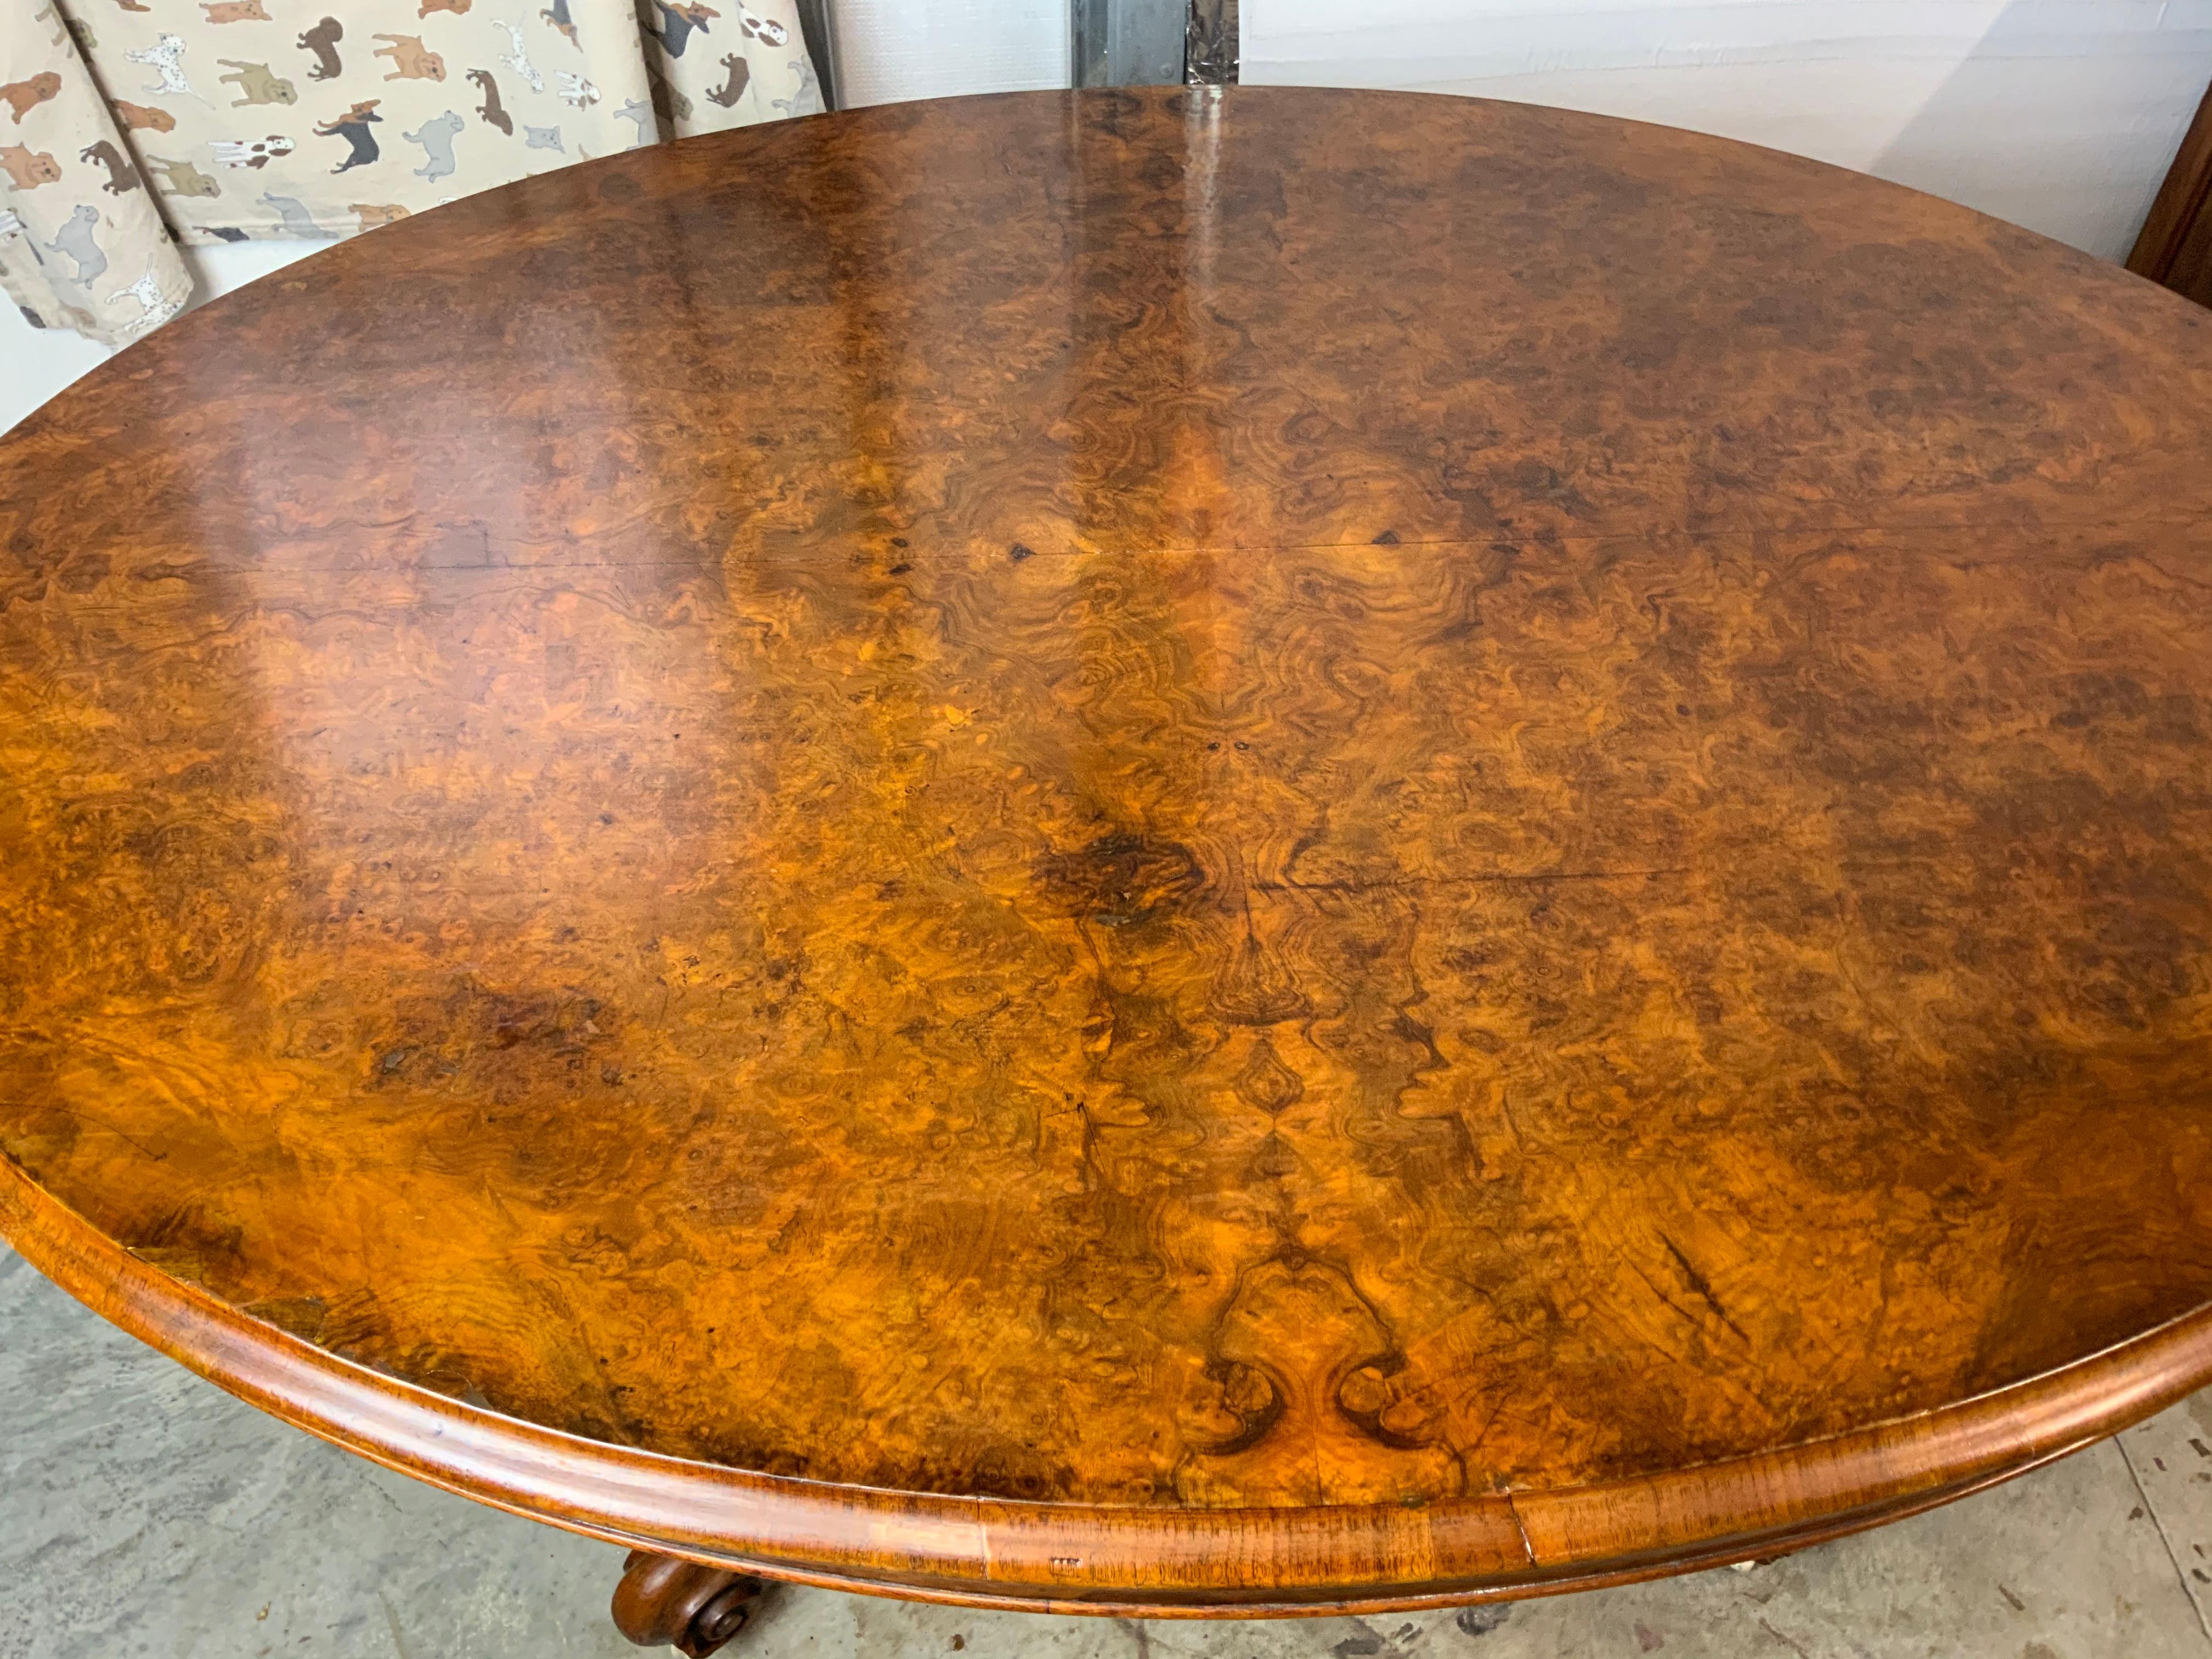 A very nice English Burl Walnut tilt top Breakfast Table. These tables were originally called “Loo” tables after the card game Lanterloo and were tilted up and stored in the corner of a room when not in use. More commonly today they are used as